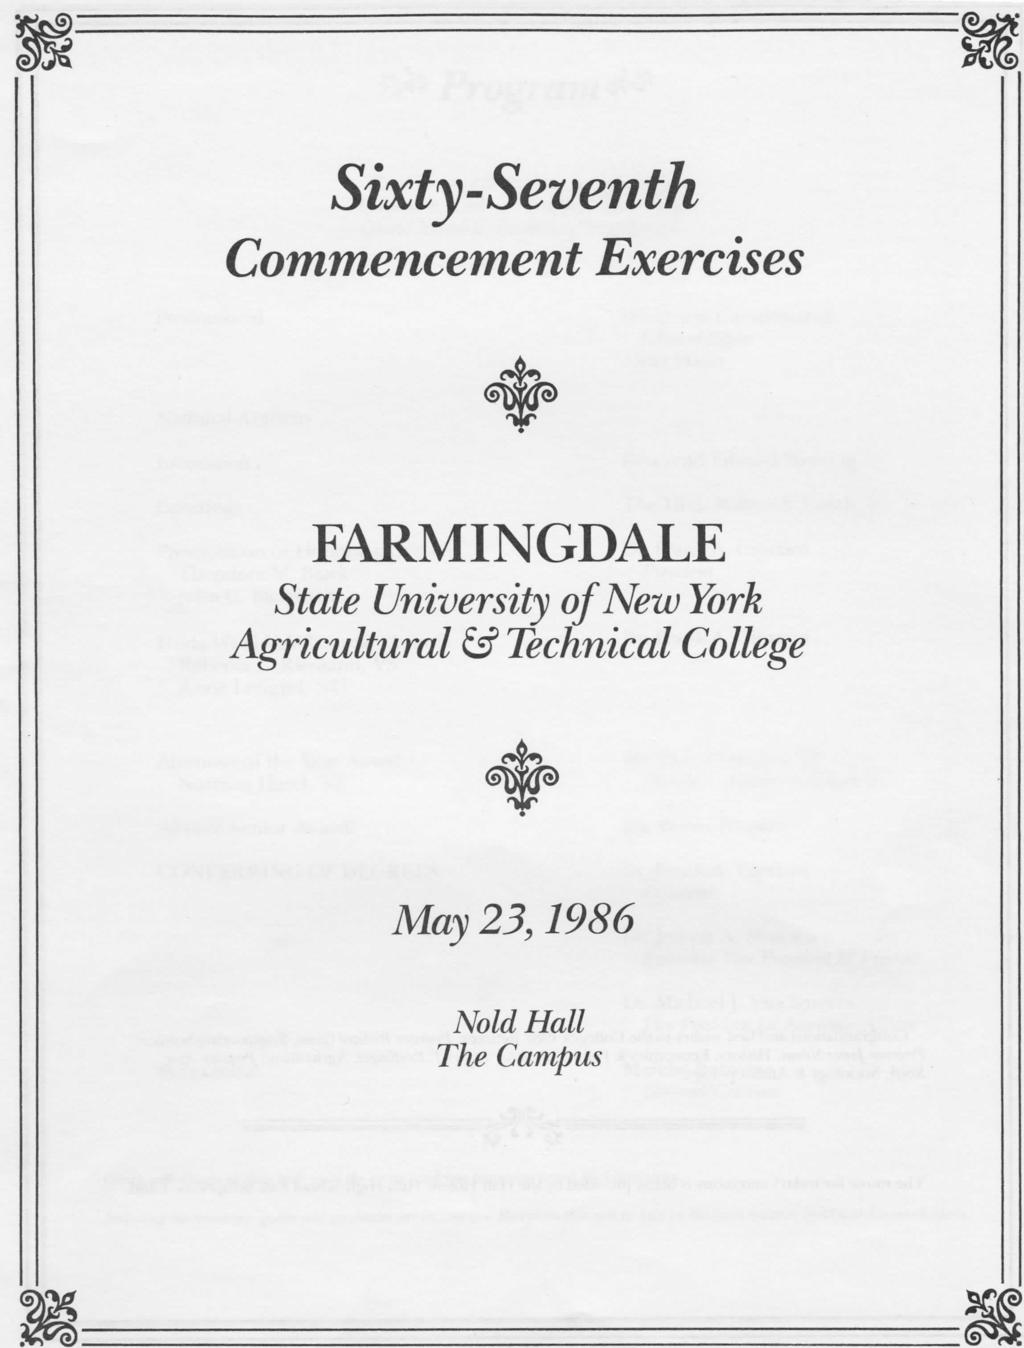 Sixty-Seventh Commencement Exercises FARMINGDALE State University of New